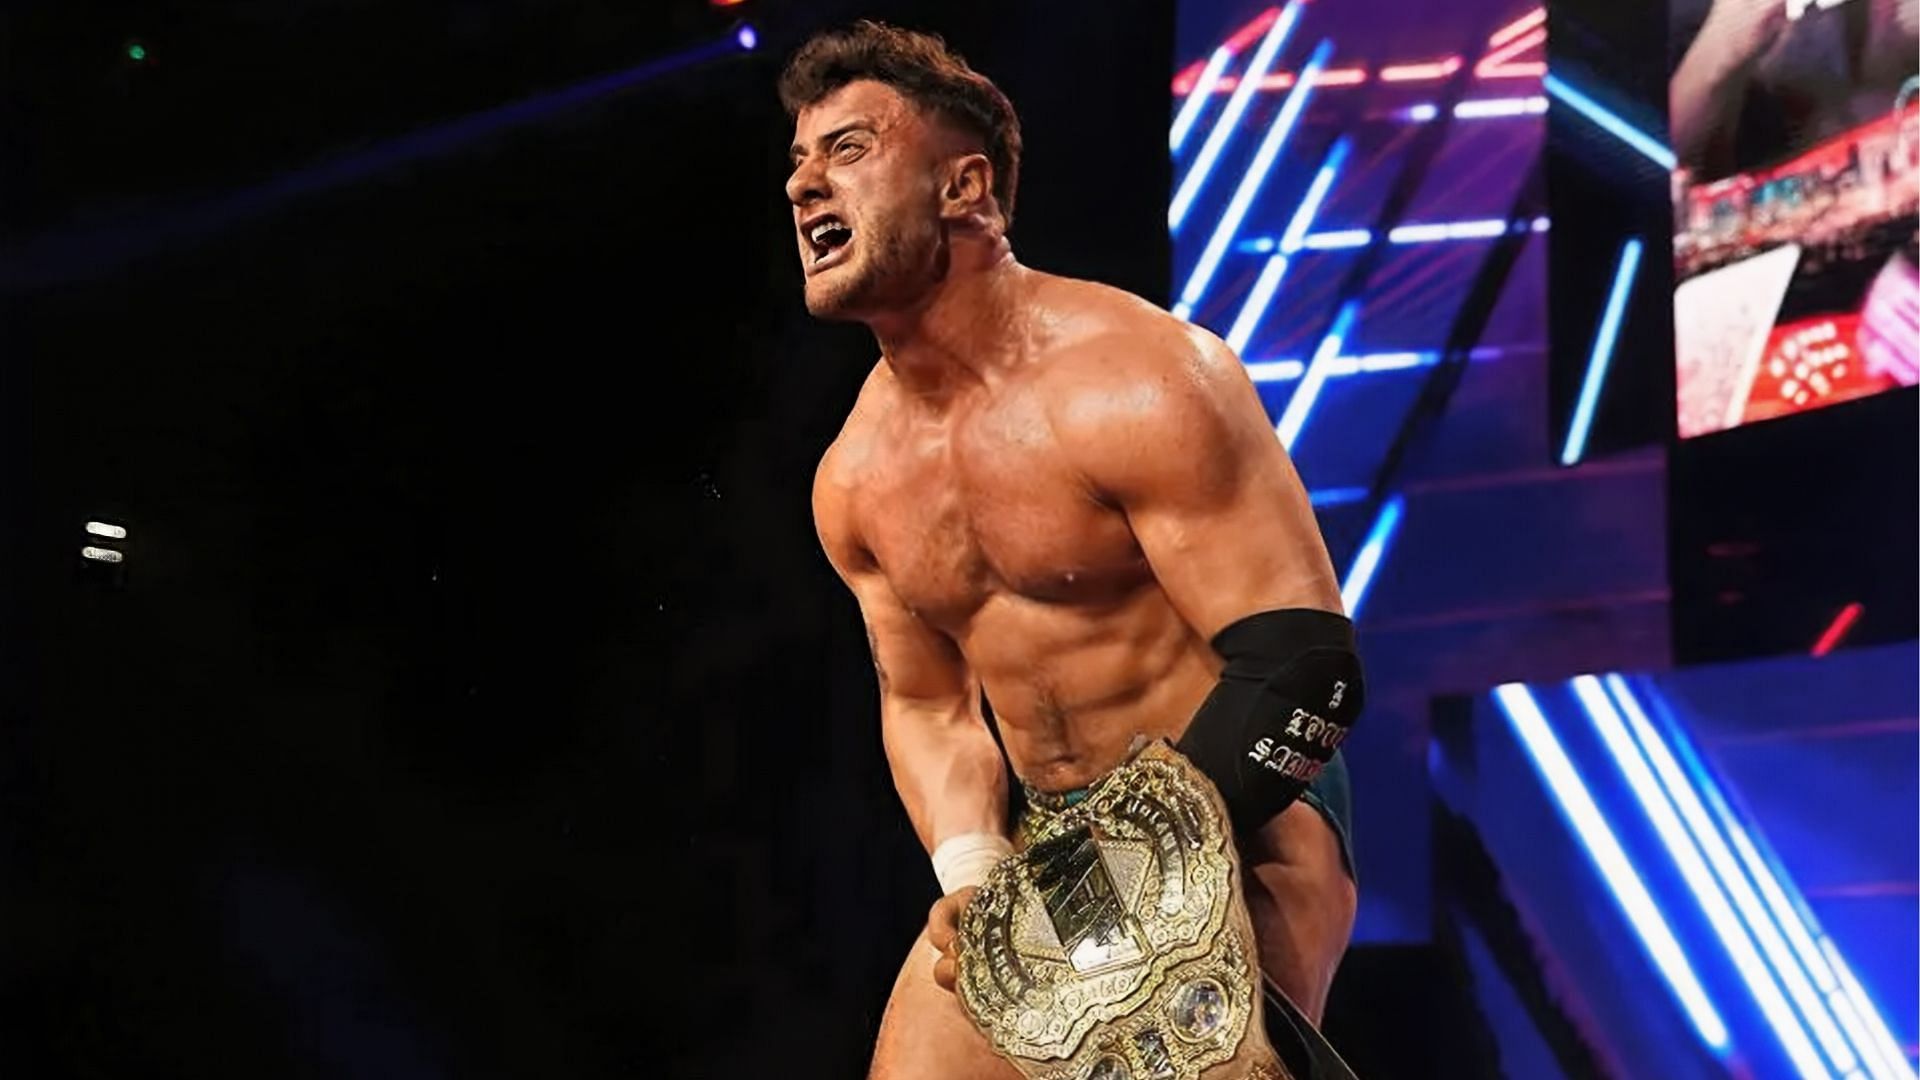 MJF is still clinging to the AEW World Championship